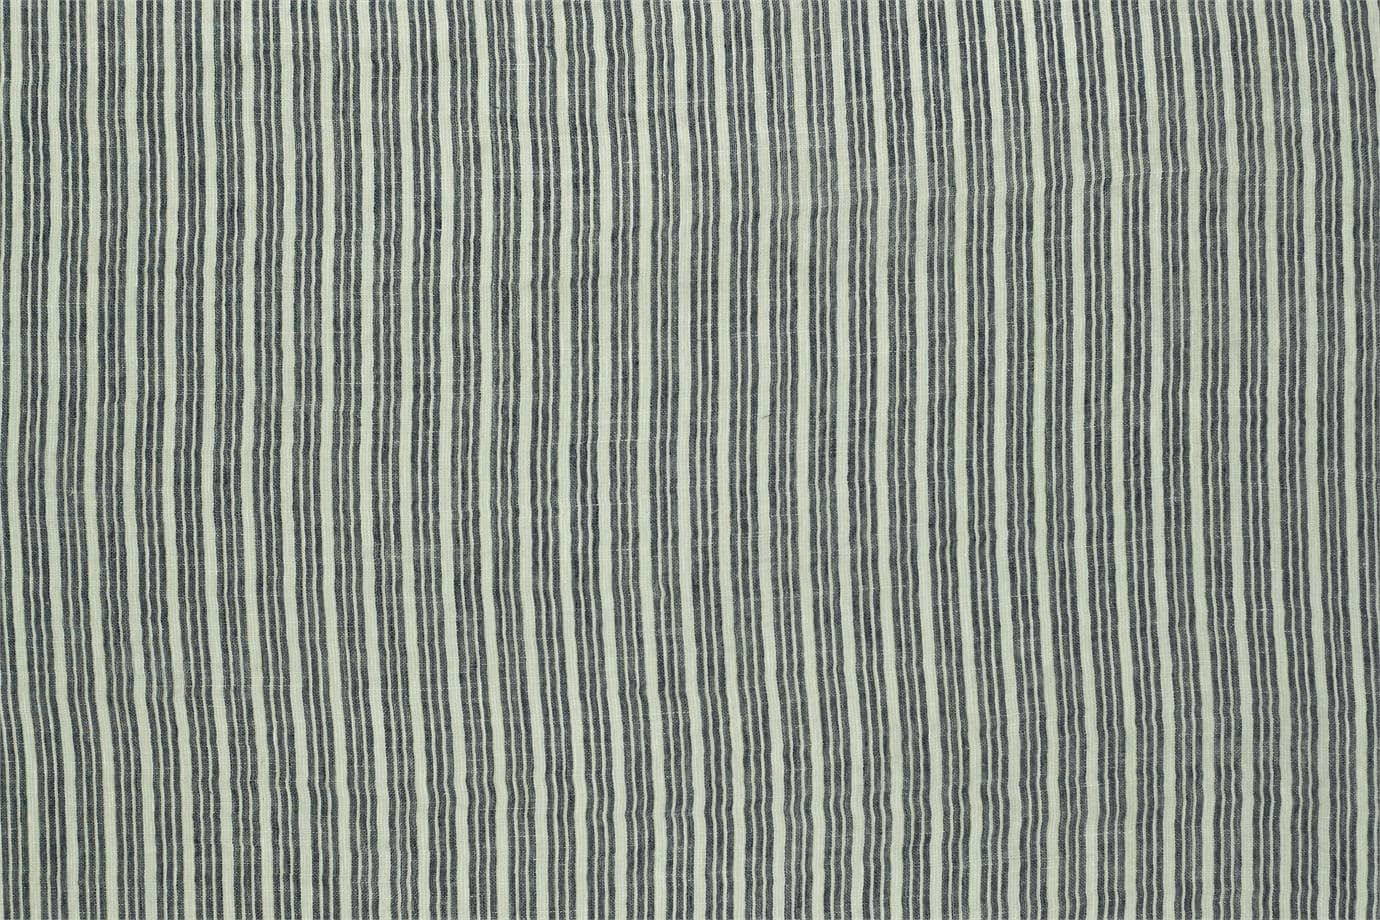 J4070 PICASSO 008 Turchese home decoration fabric